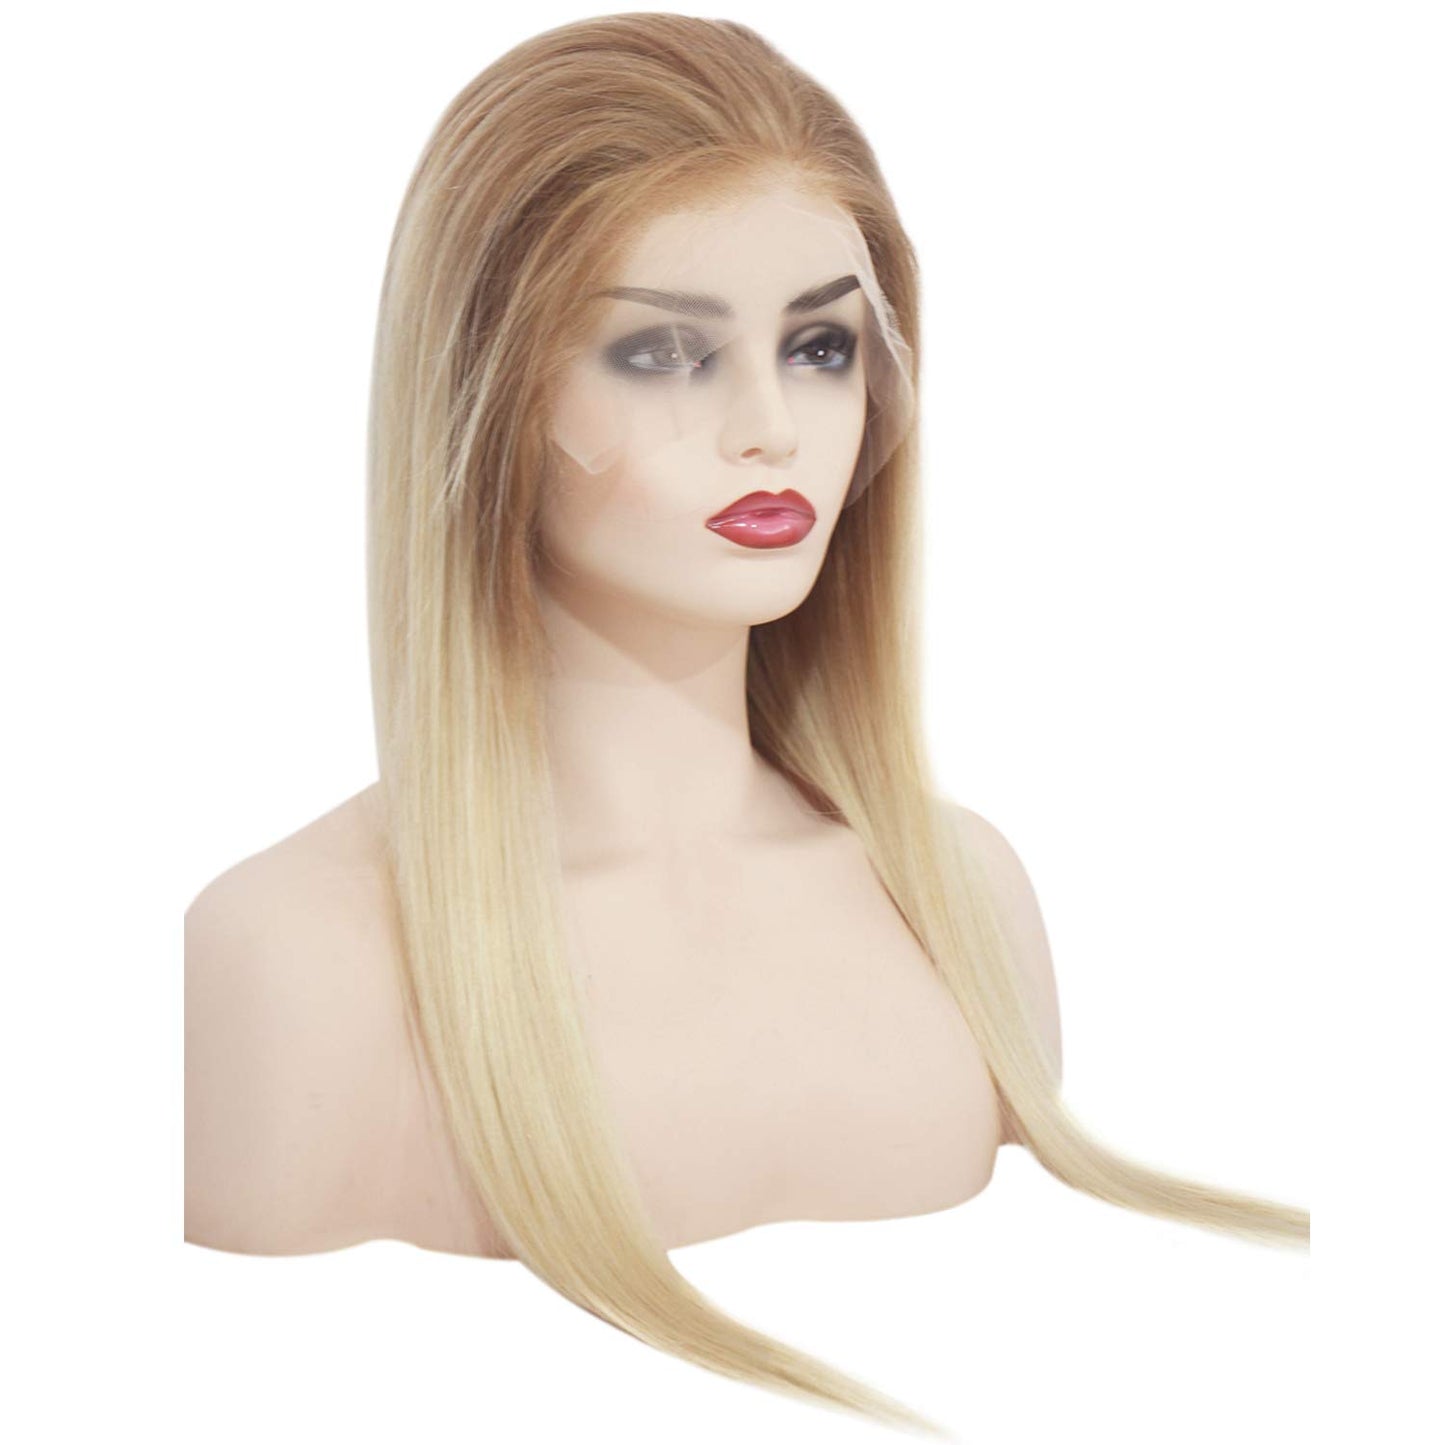 16" Divine Custom Color Wig Ombre Blonde with Rooting Golden Brown to Bleached Blonde 613 Pre Plucked Hairline -  All That & More Salon Presents up to 50% off- Hope & Hair Breast Cancer Awareness Weekend Event